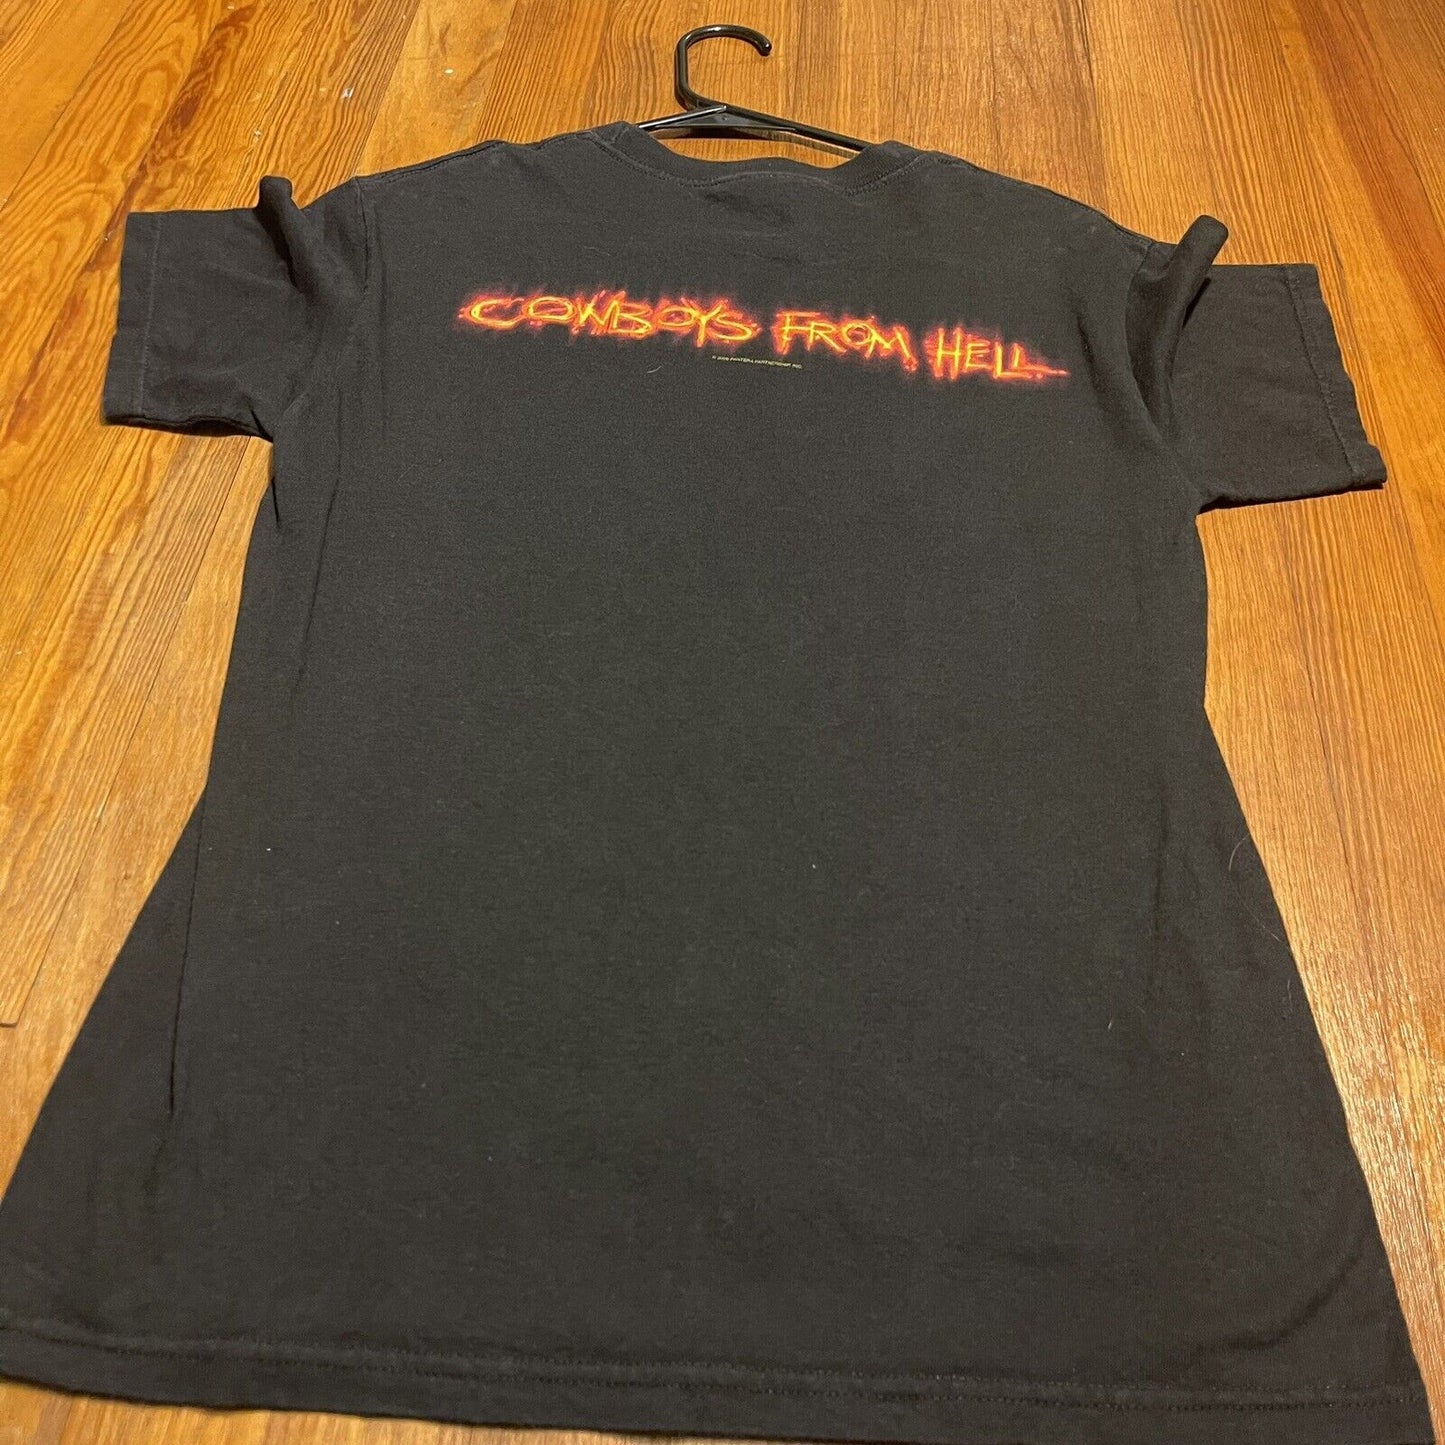 Vintage Panthers Cowboys In Hell Shirt Size Small